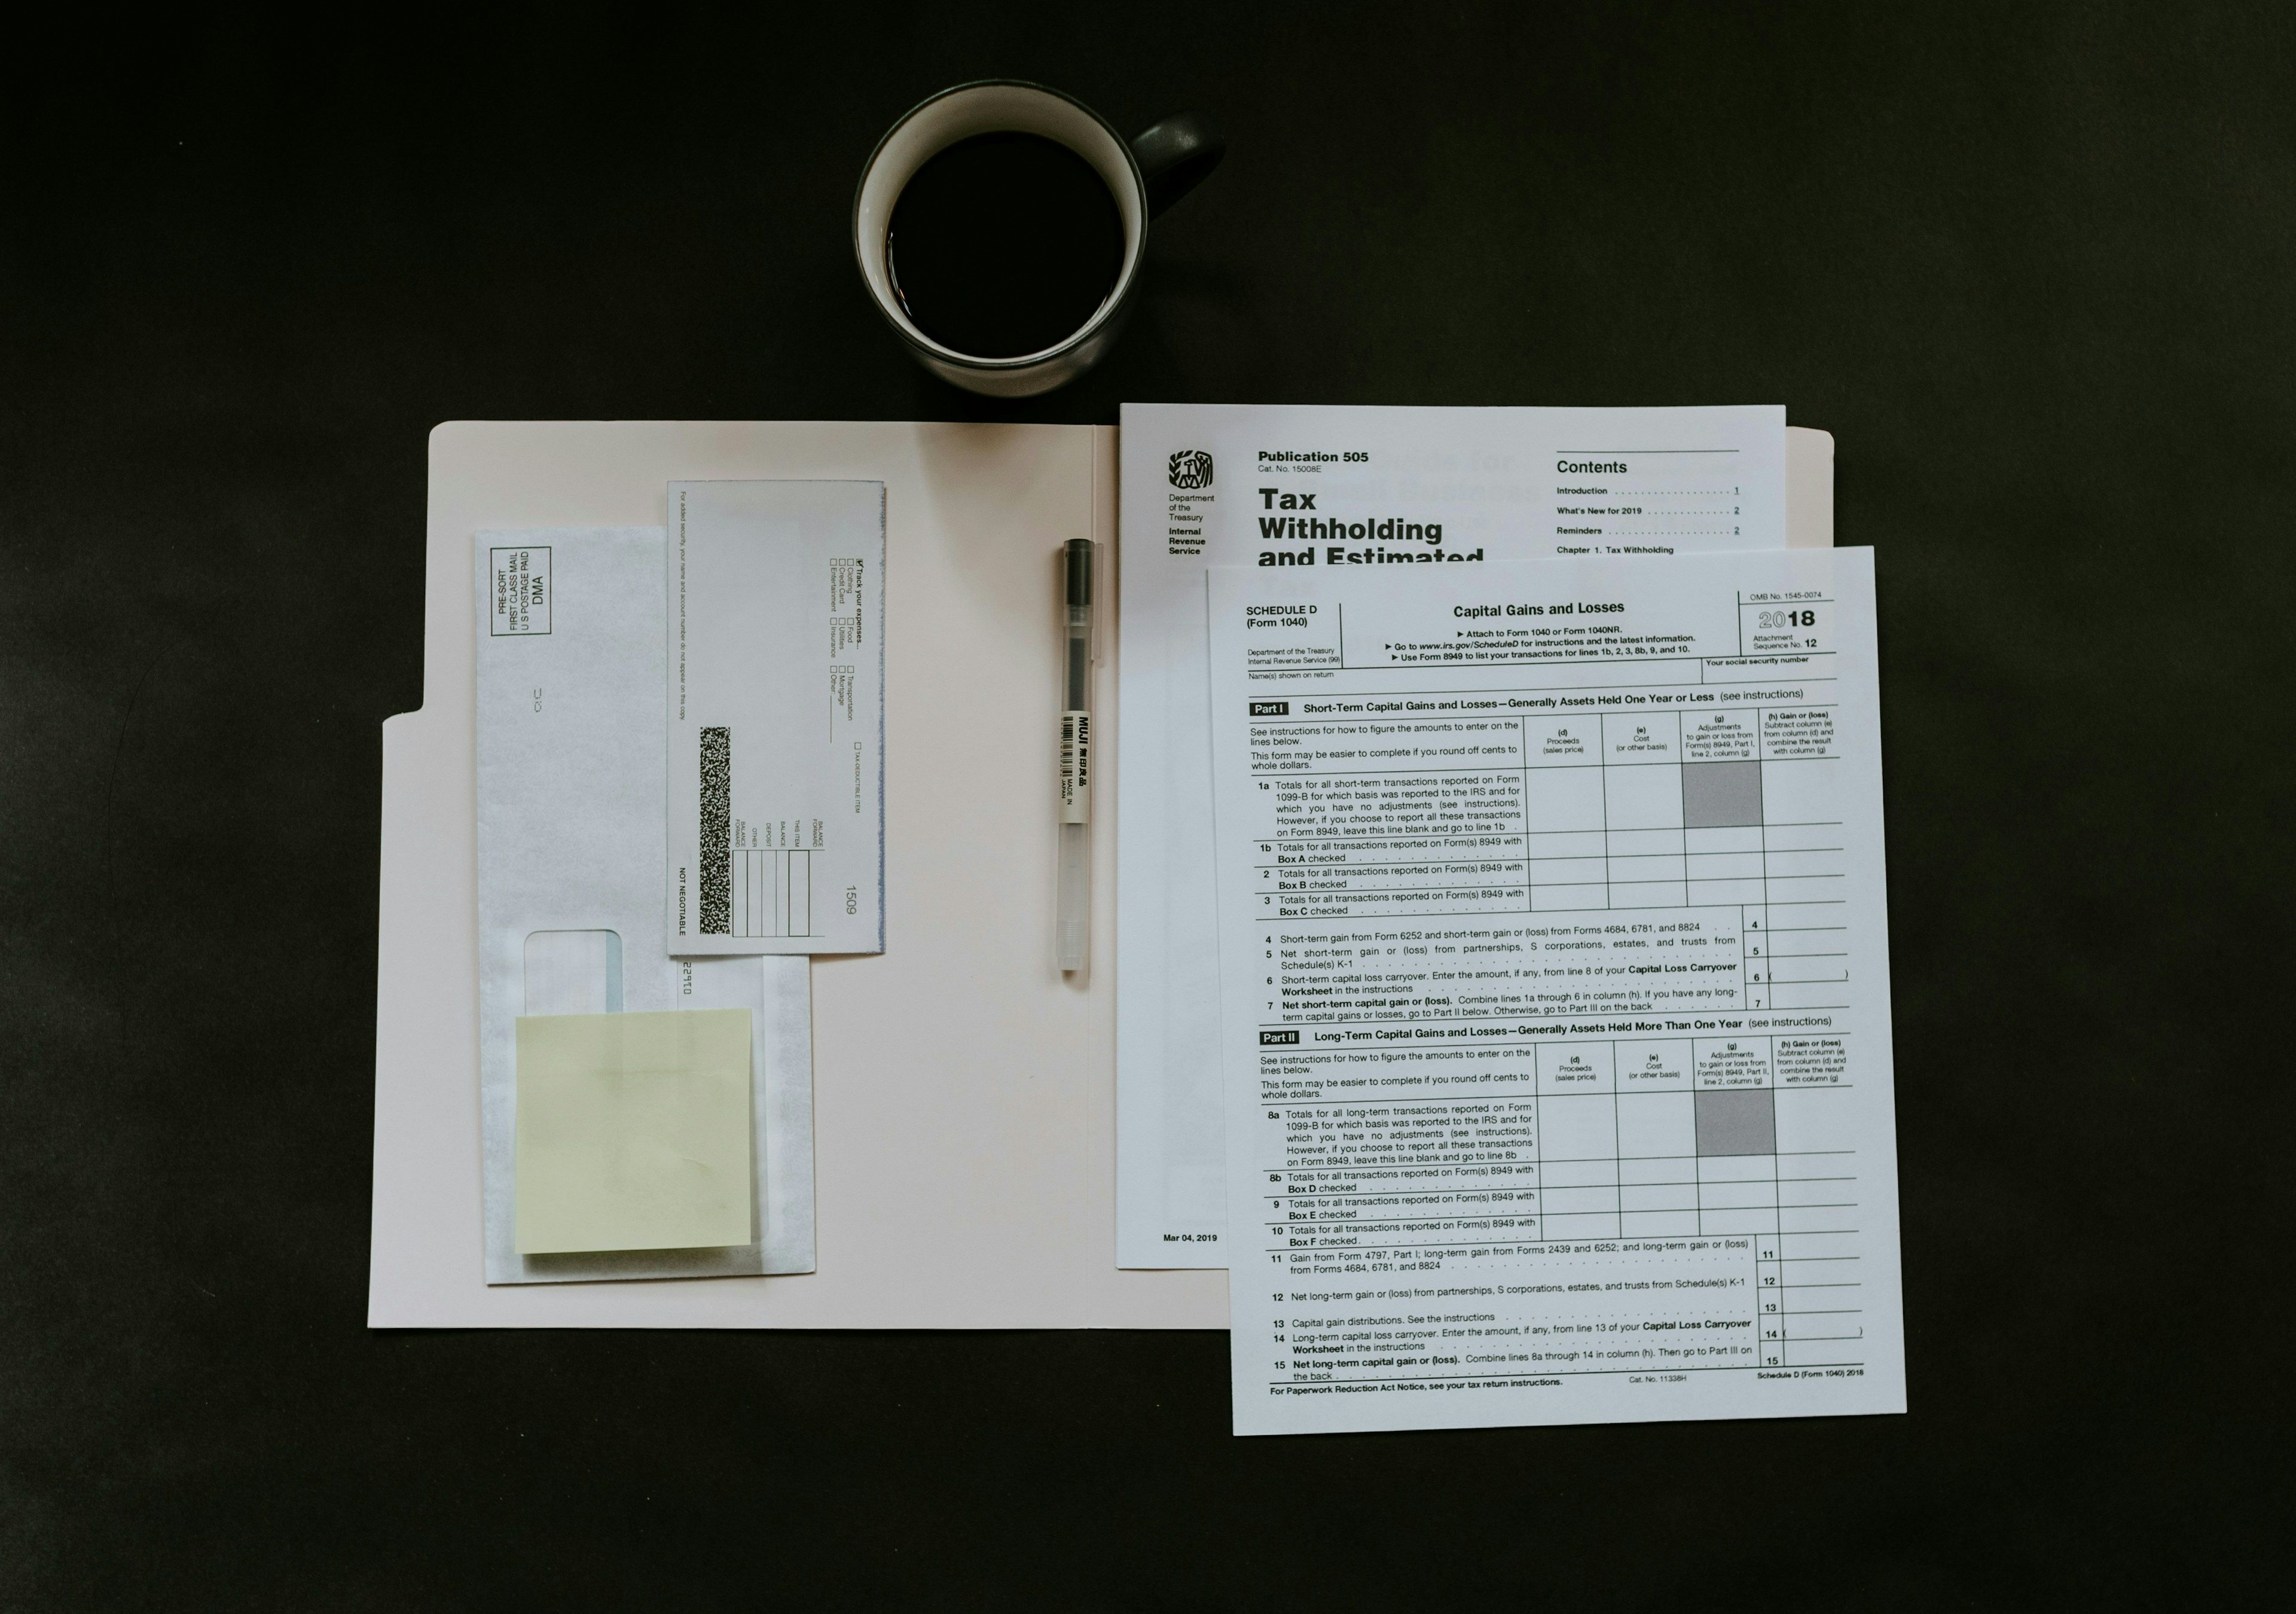 Tax documents laid out on table